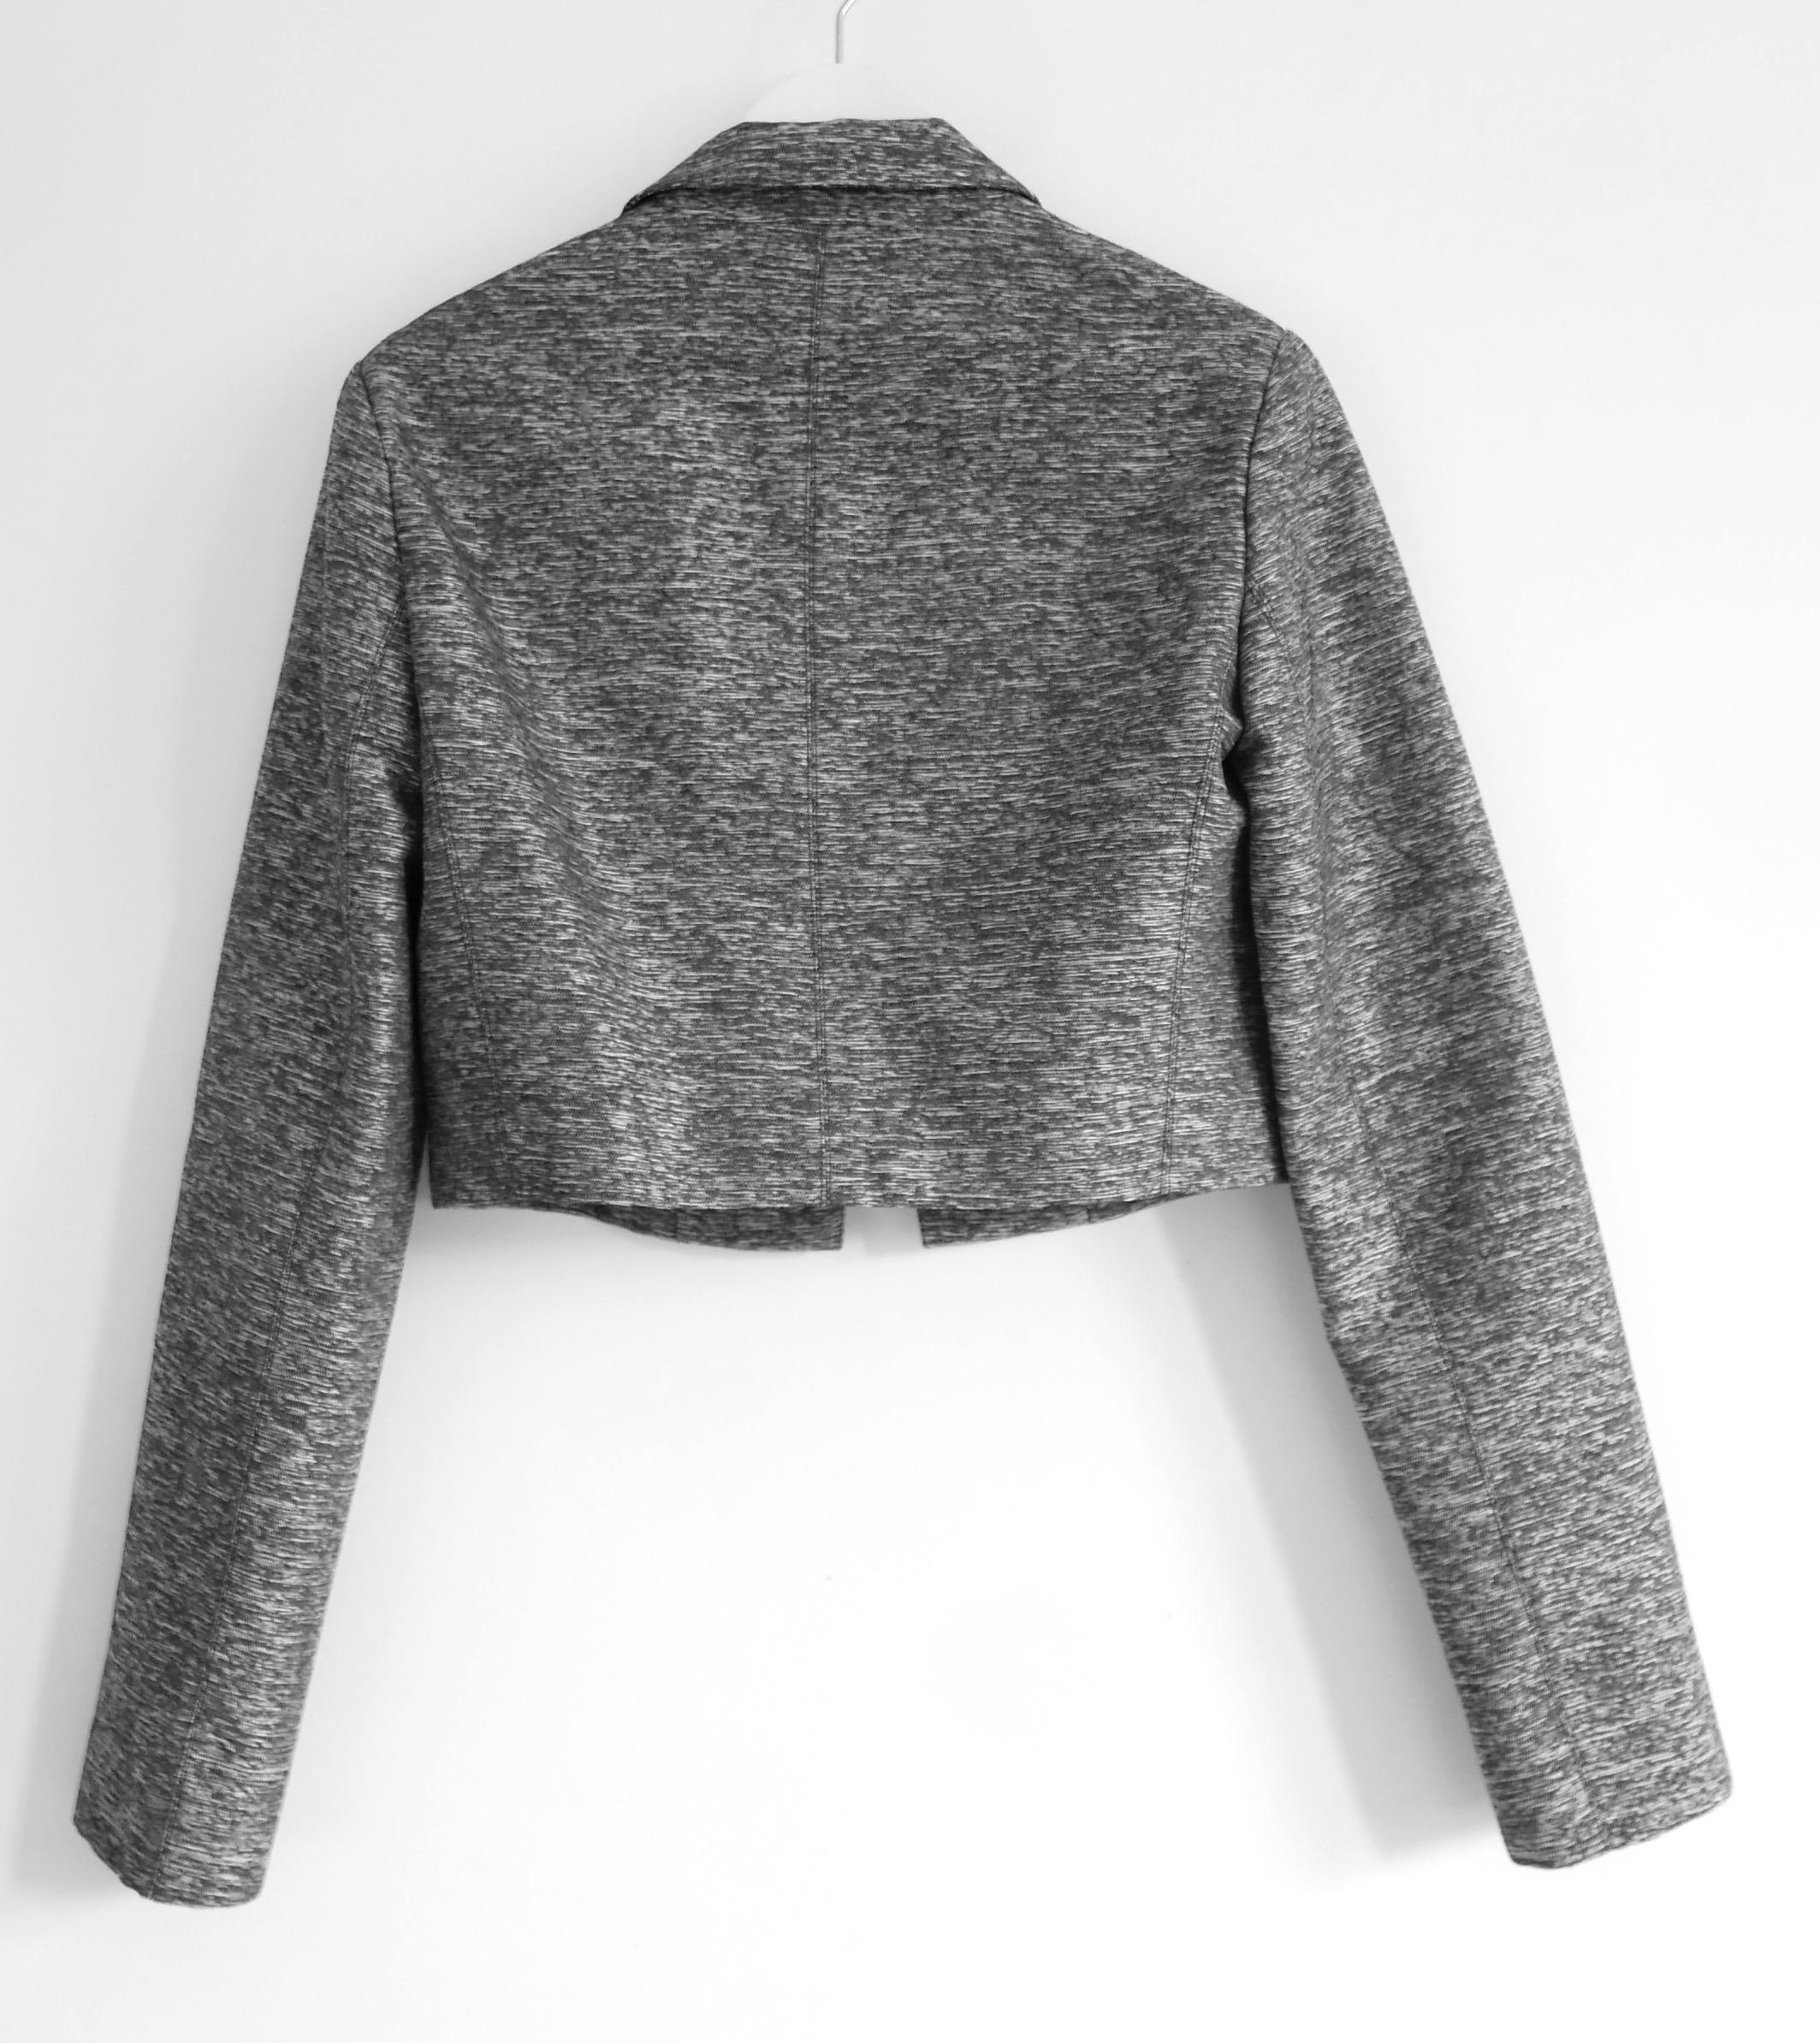 Sleek and chic Dior cropped jacket from Raf Simons’ Resort 2015 collection. Look 57 on the runway. Bought for around £2950 and unworn with tag/spare fastening. Made from lightly textured silvery grey marled viscose and silk with a black silk lining.